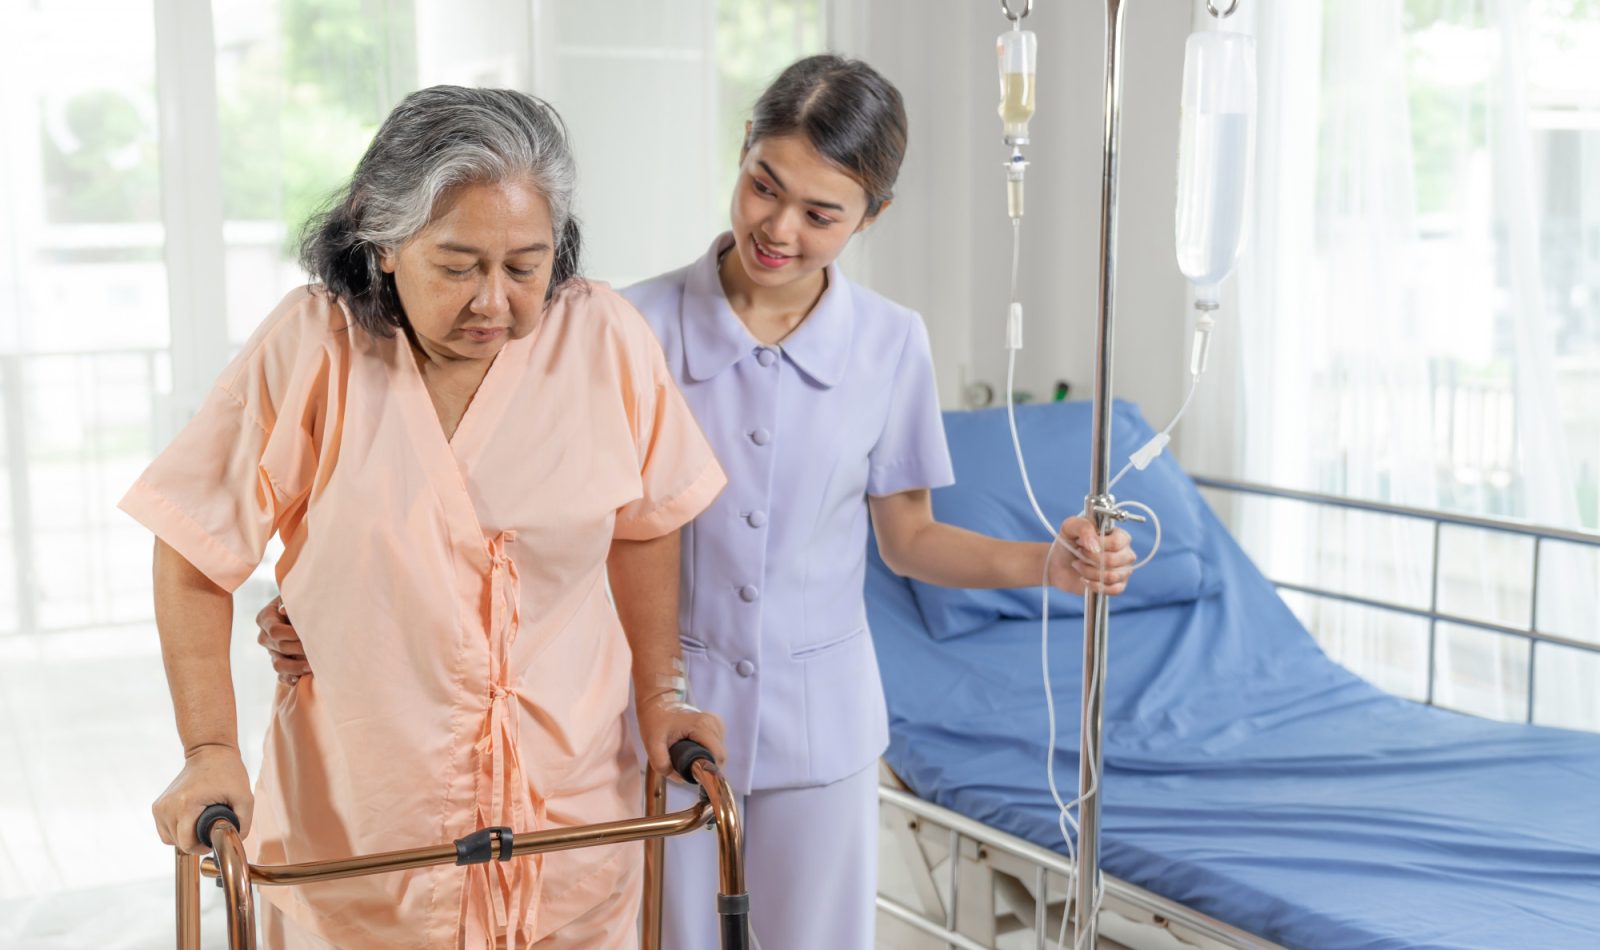 nurses-are-well-good-taken-care-elderly-patients-hospital-bed-patients-medical-healthcare-concept